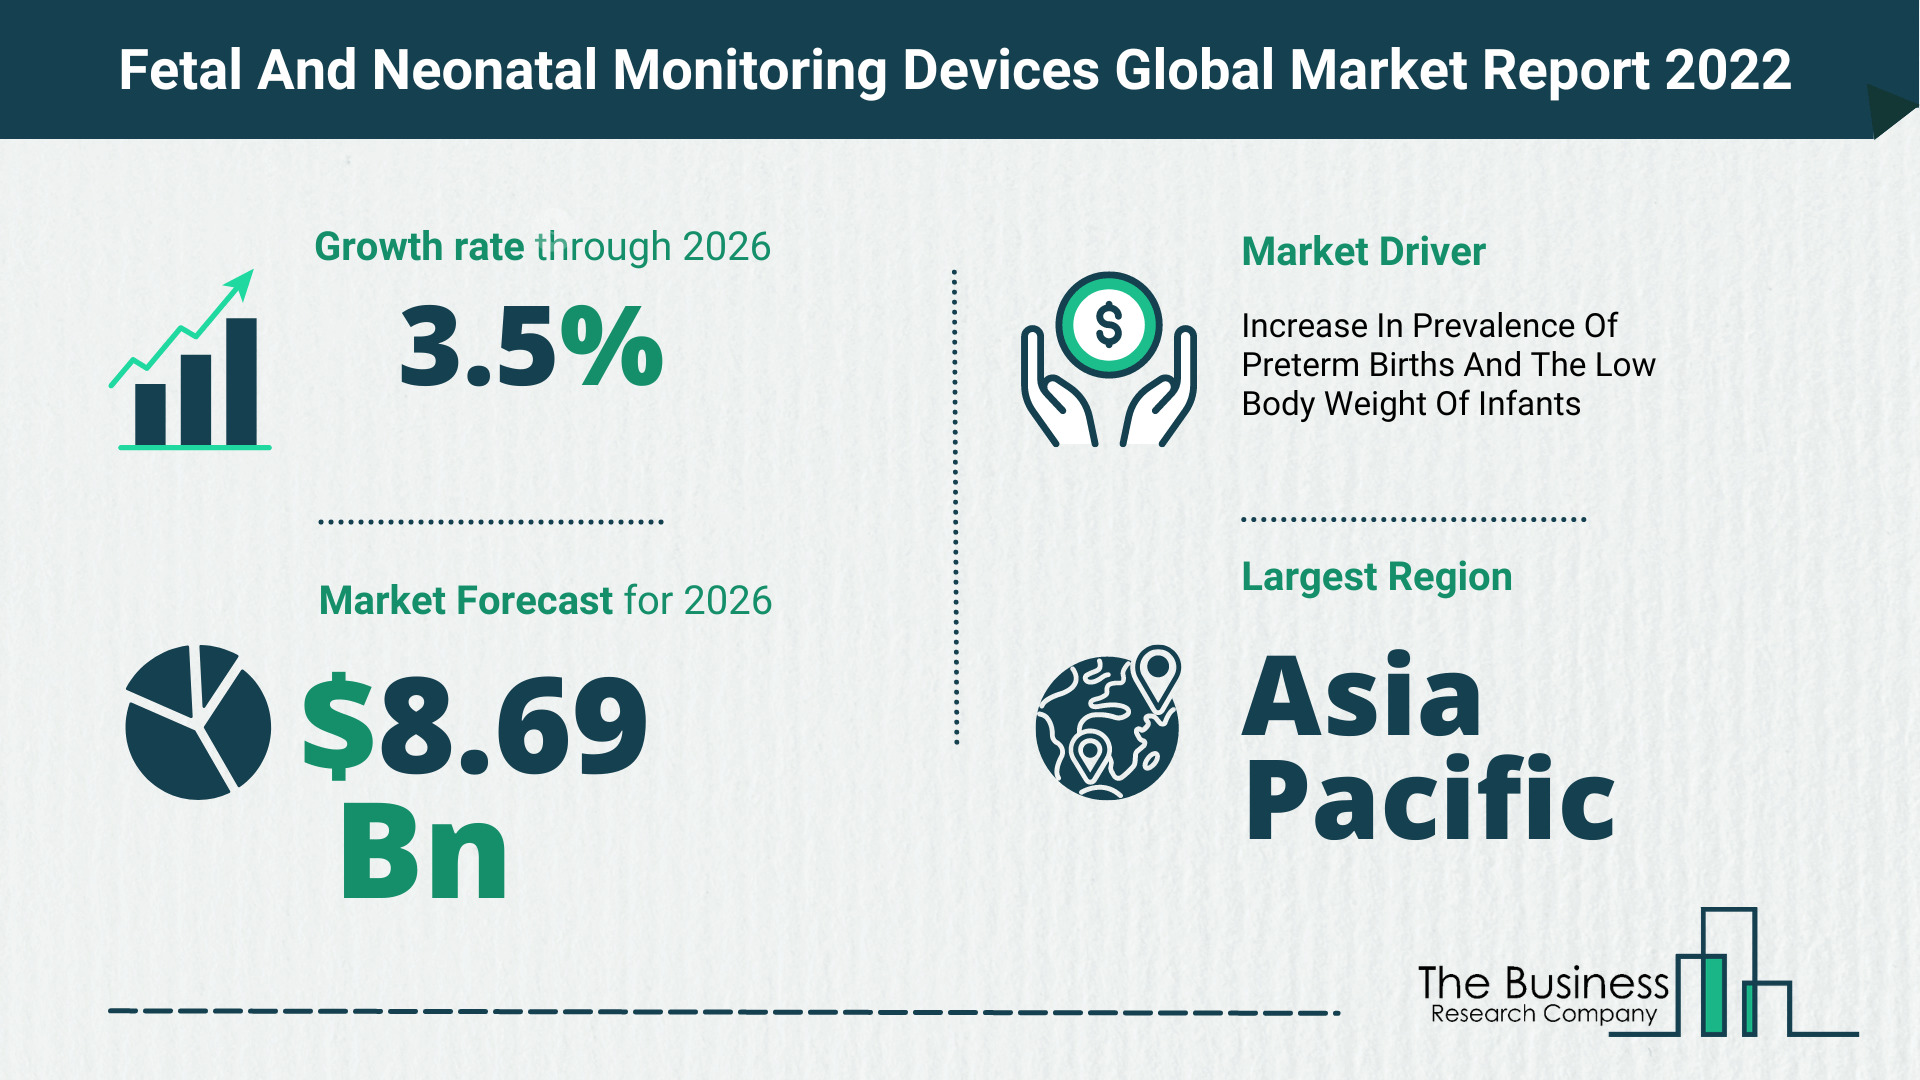 Global Fetal And Neonatal Monitoring Devices Market